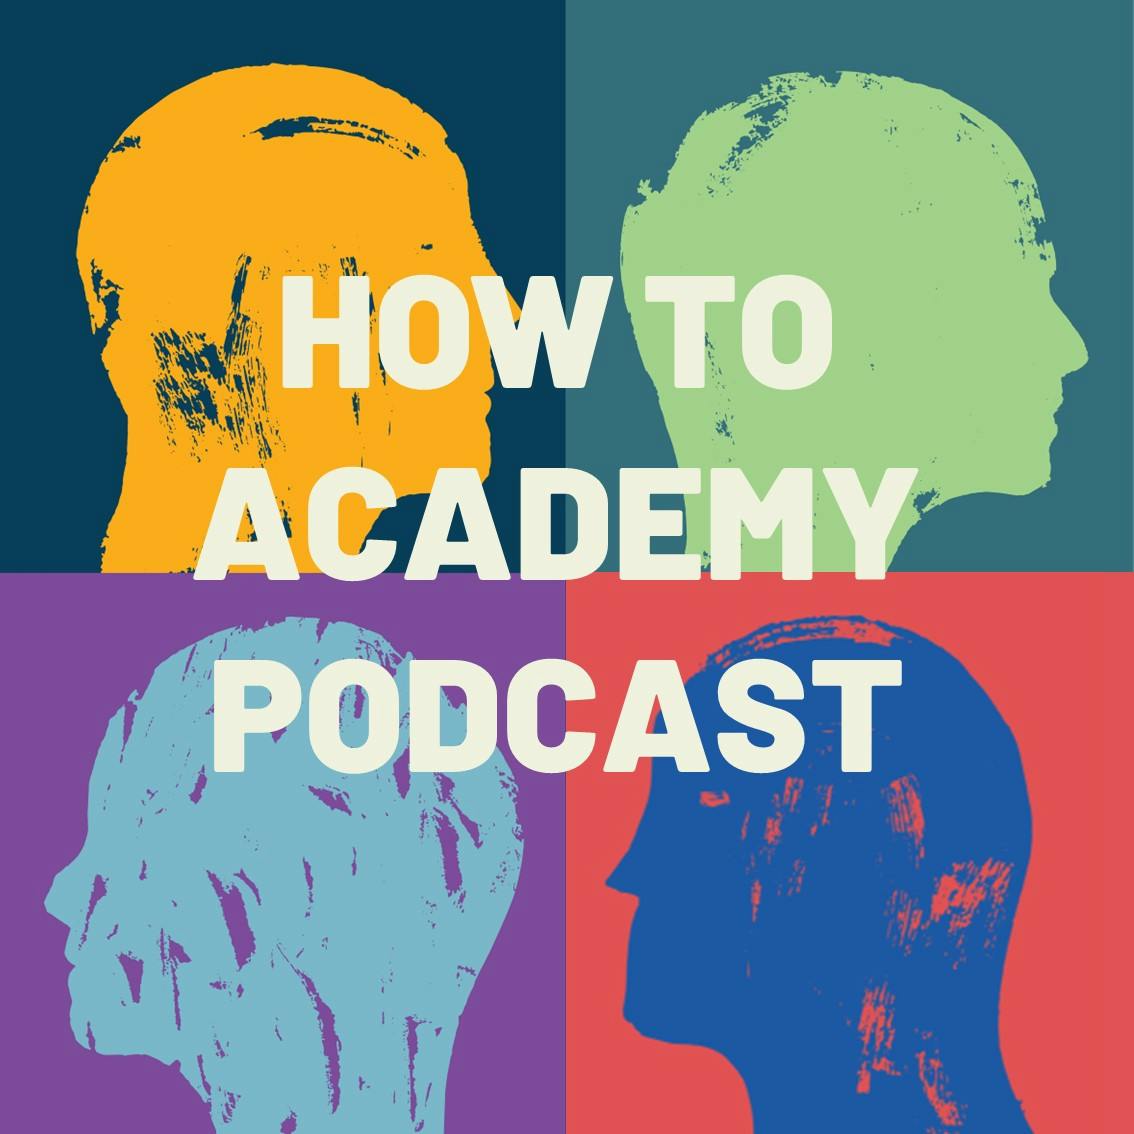 How To Academy Podcast:How To Academy